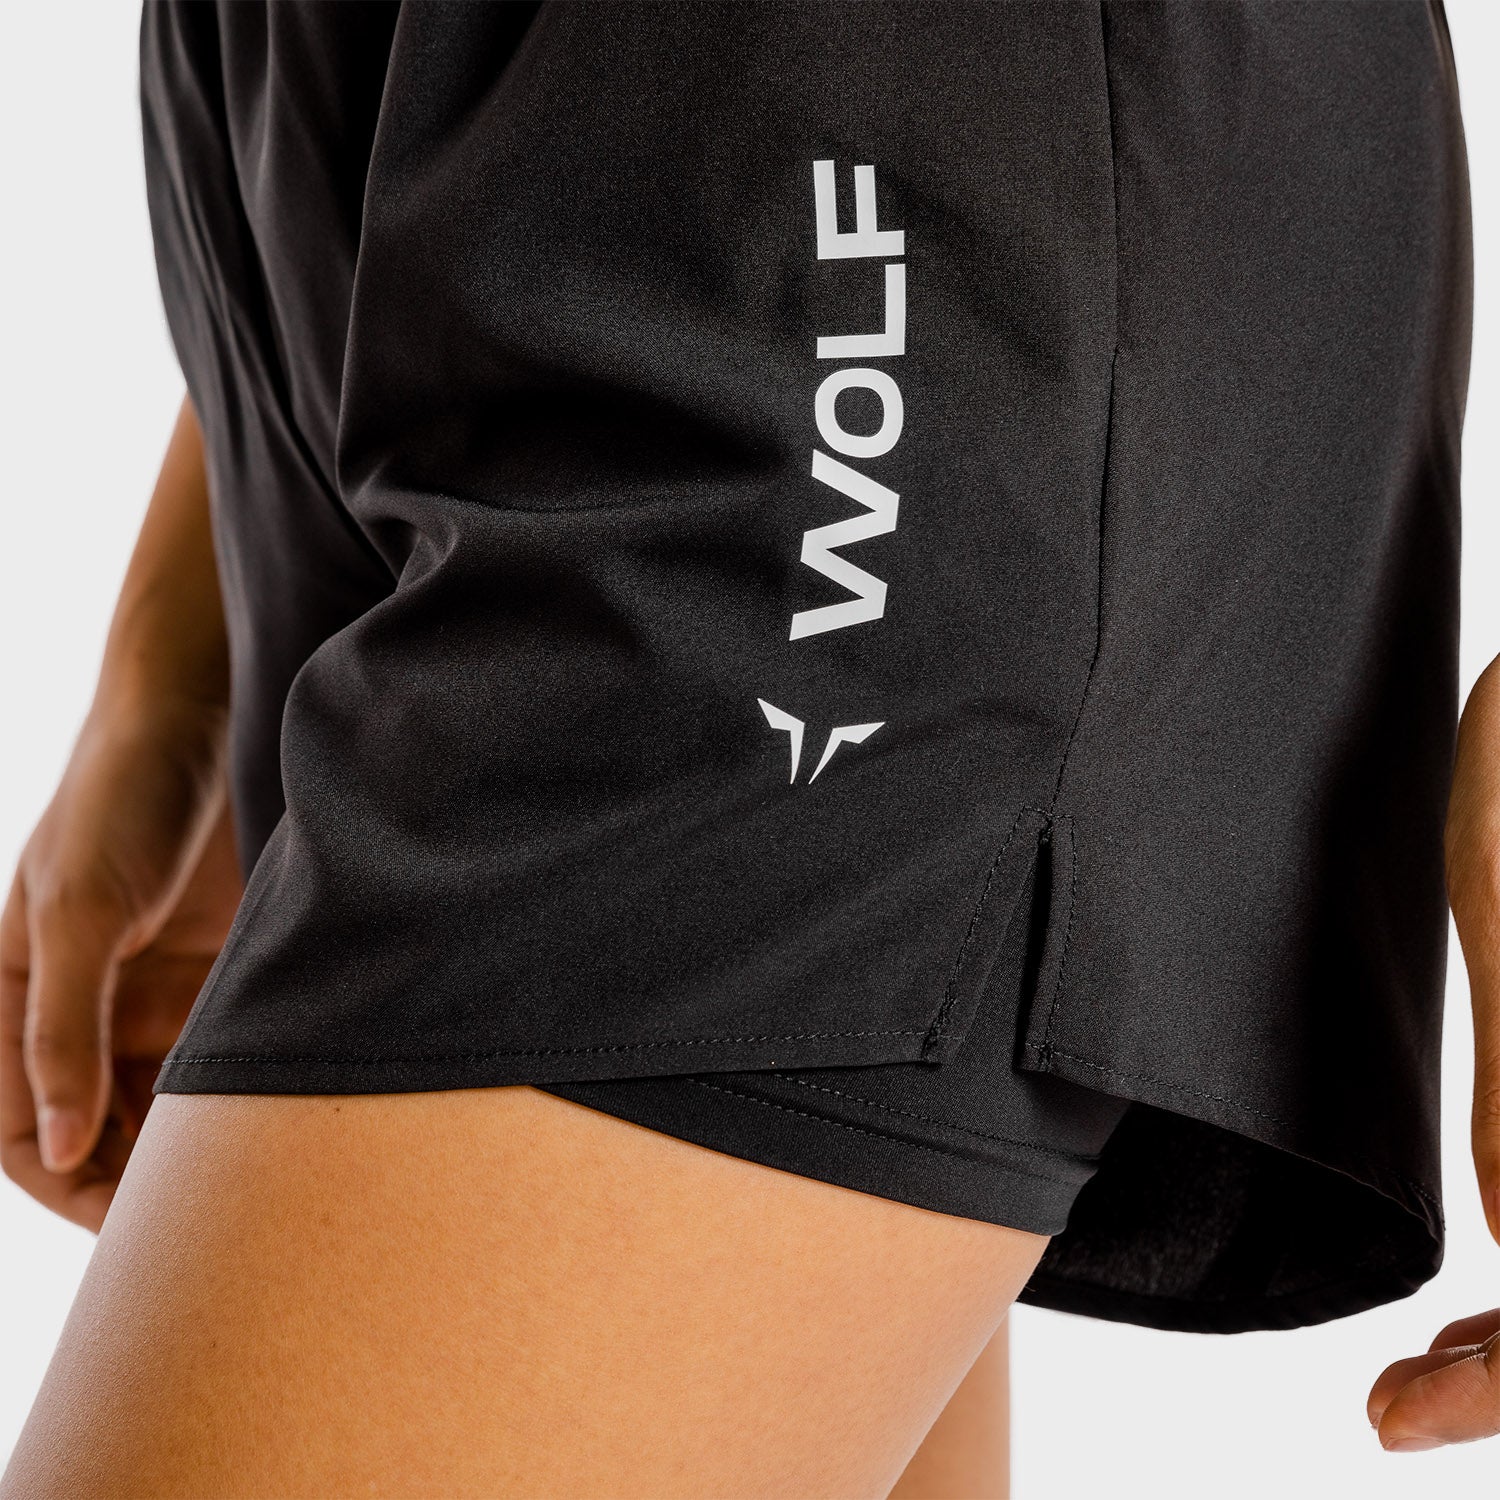 squatwolf-gym-shorts-for-women-primal-2-in-1-shorts-black-workout-clothes